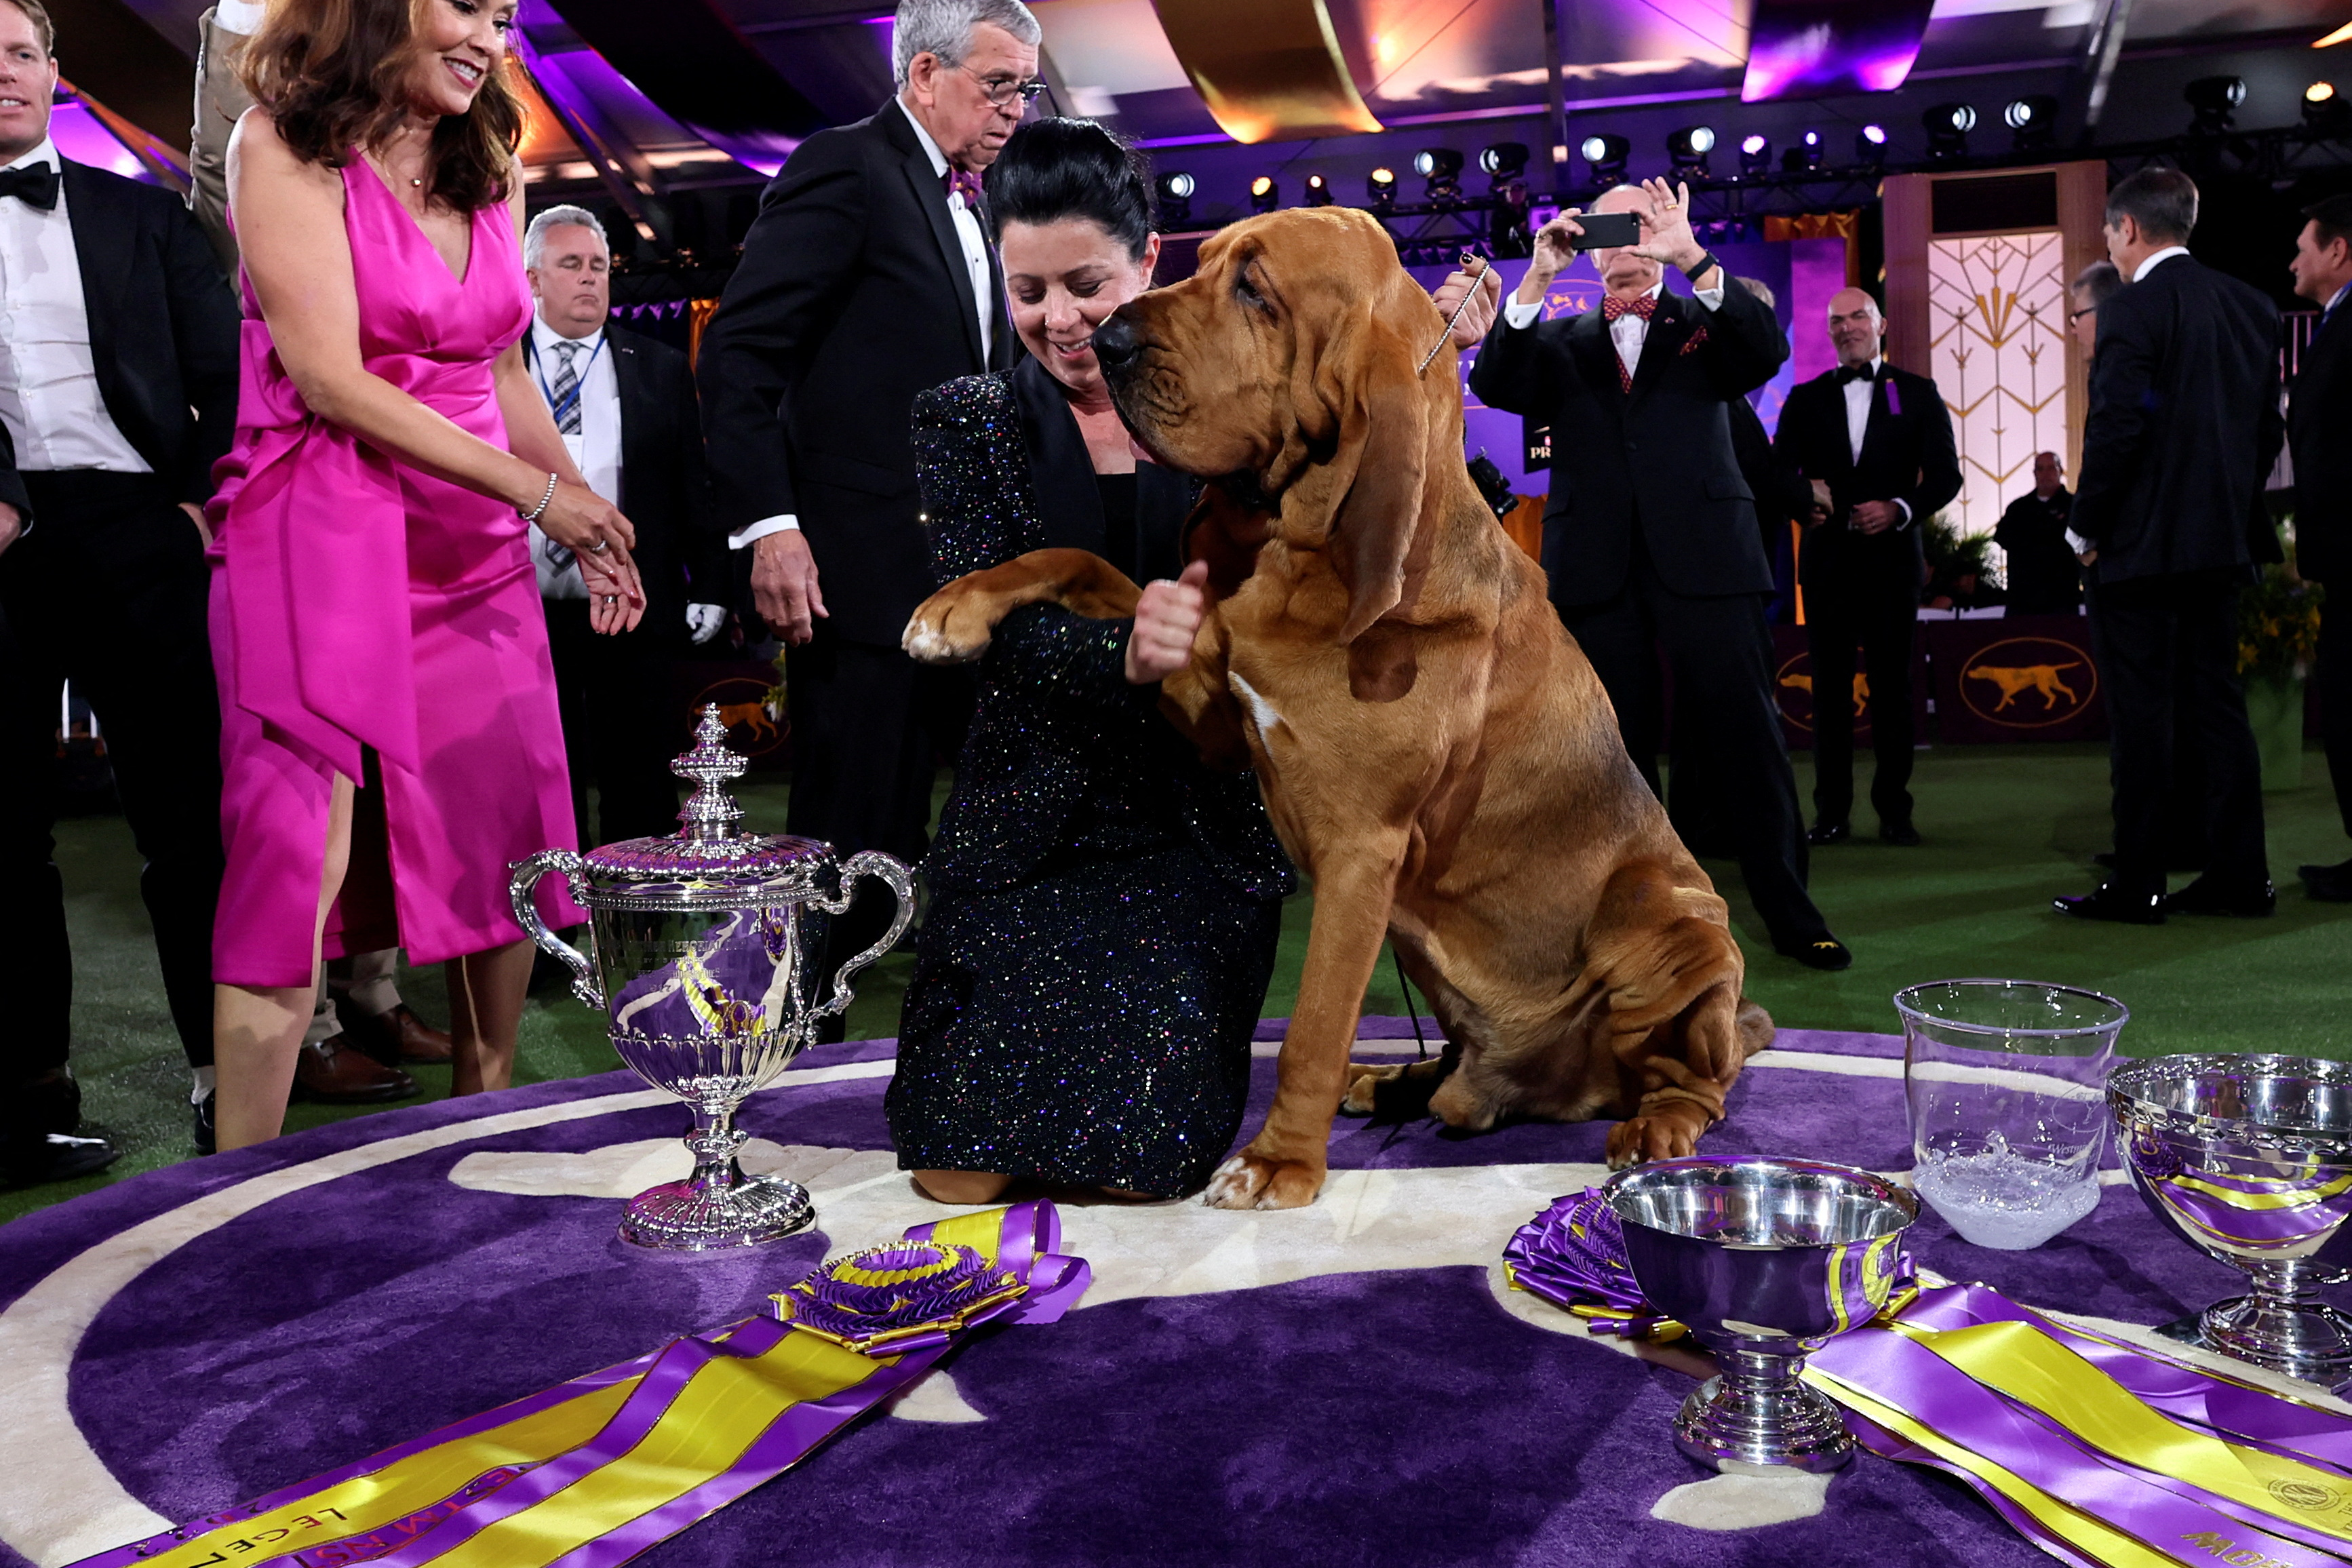 146th Westminster Kennel Club Dog Show in Tarrytown, New York